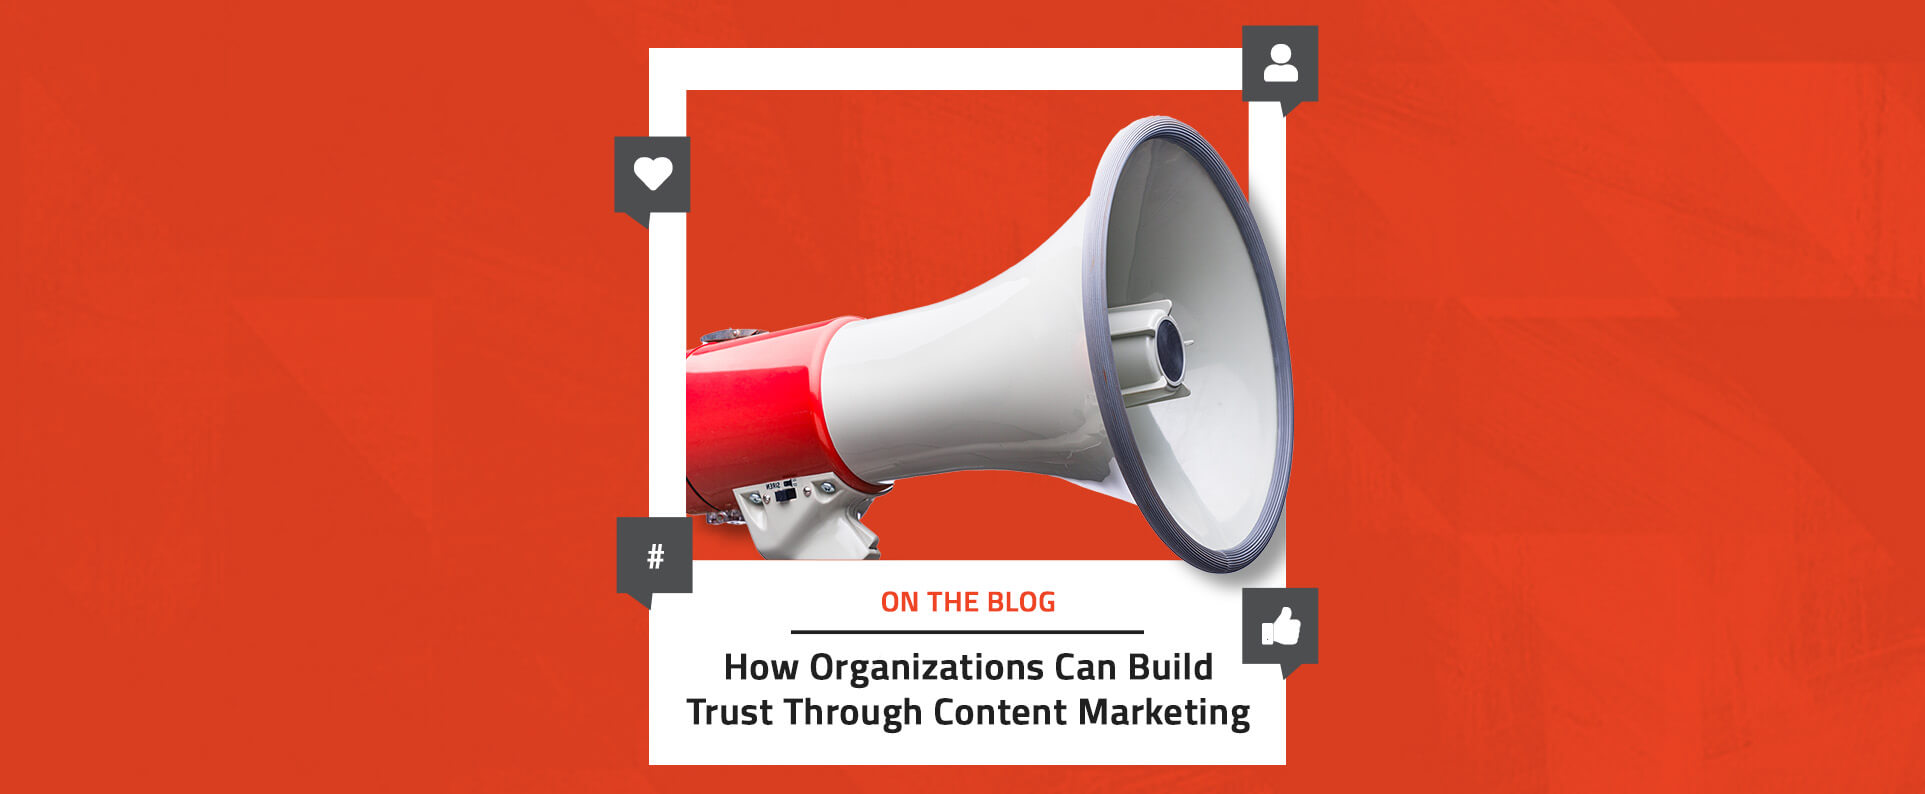 How Organizations Can Build Trust Through Content Marketing